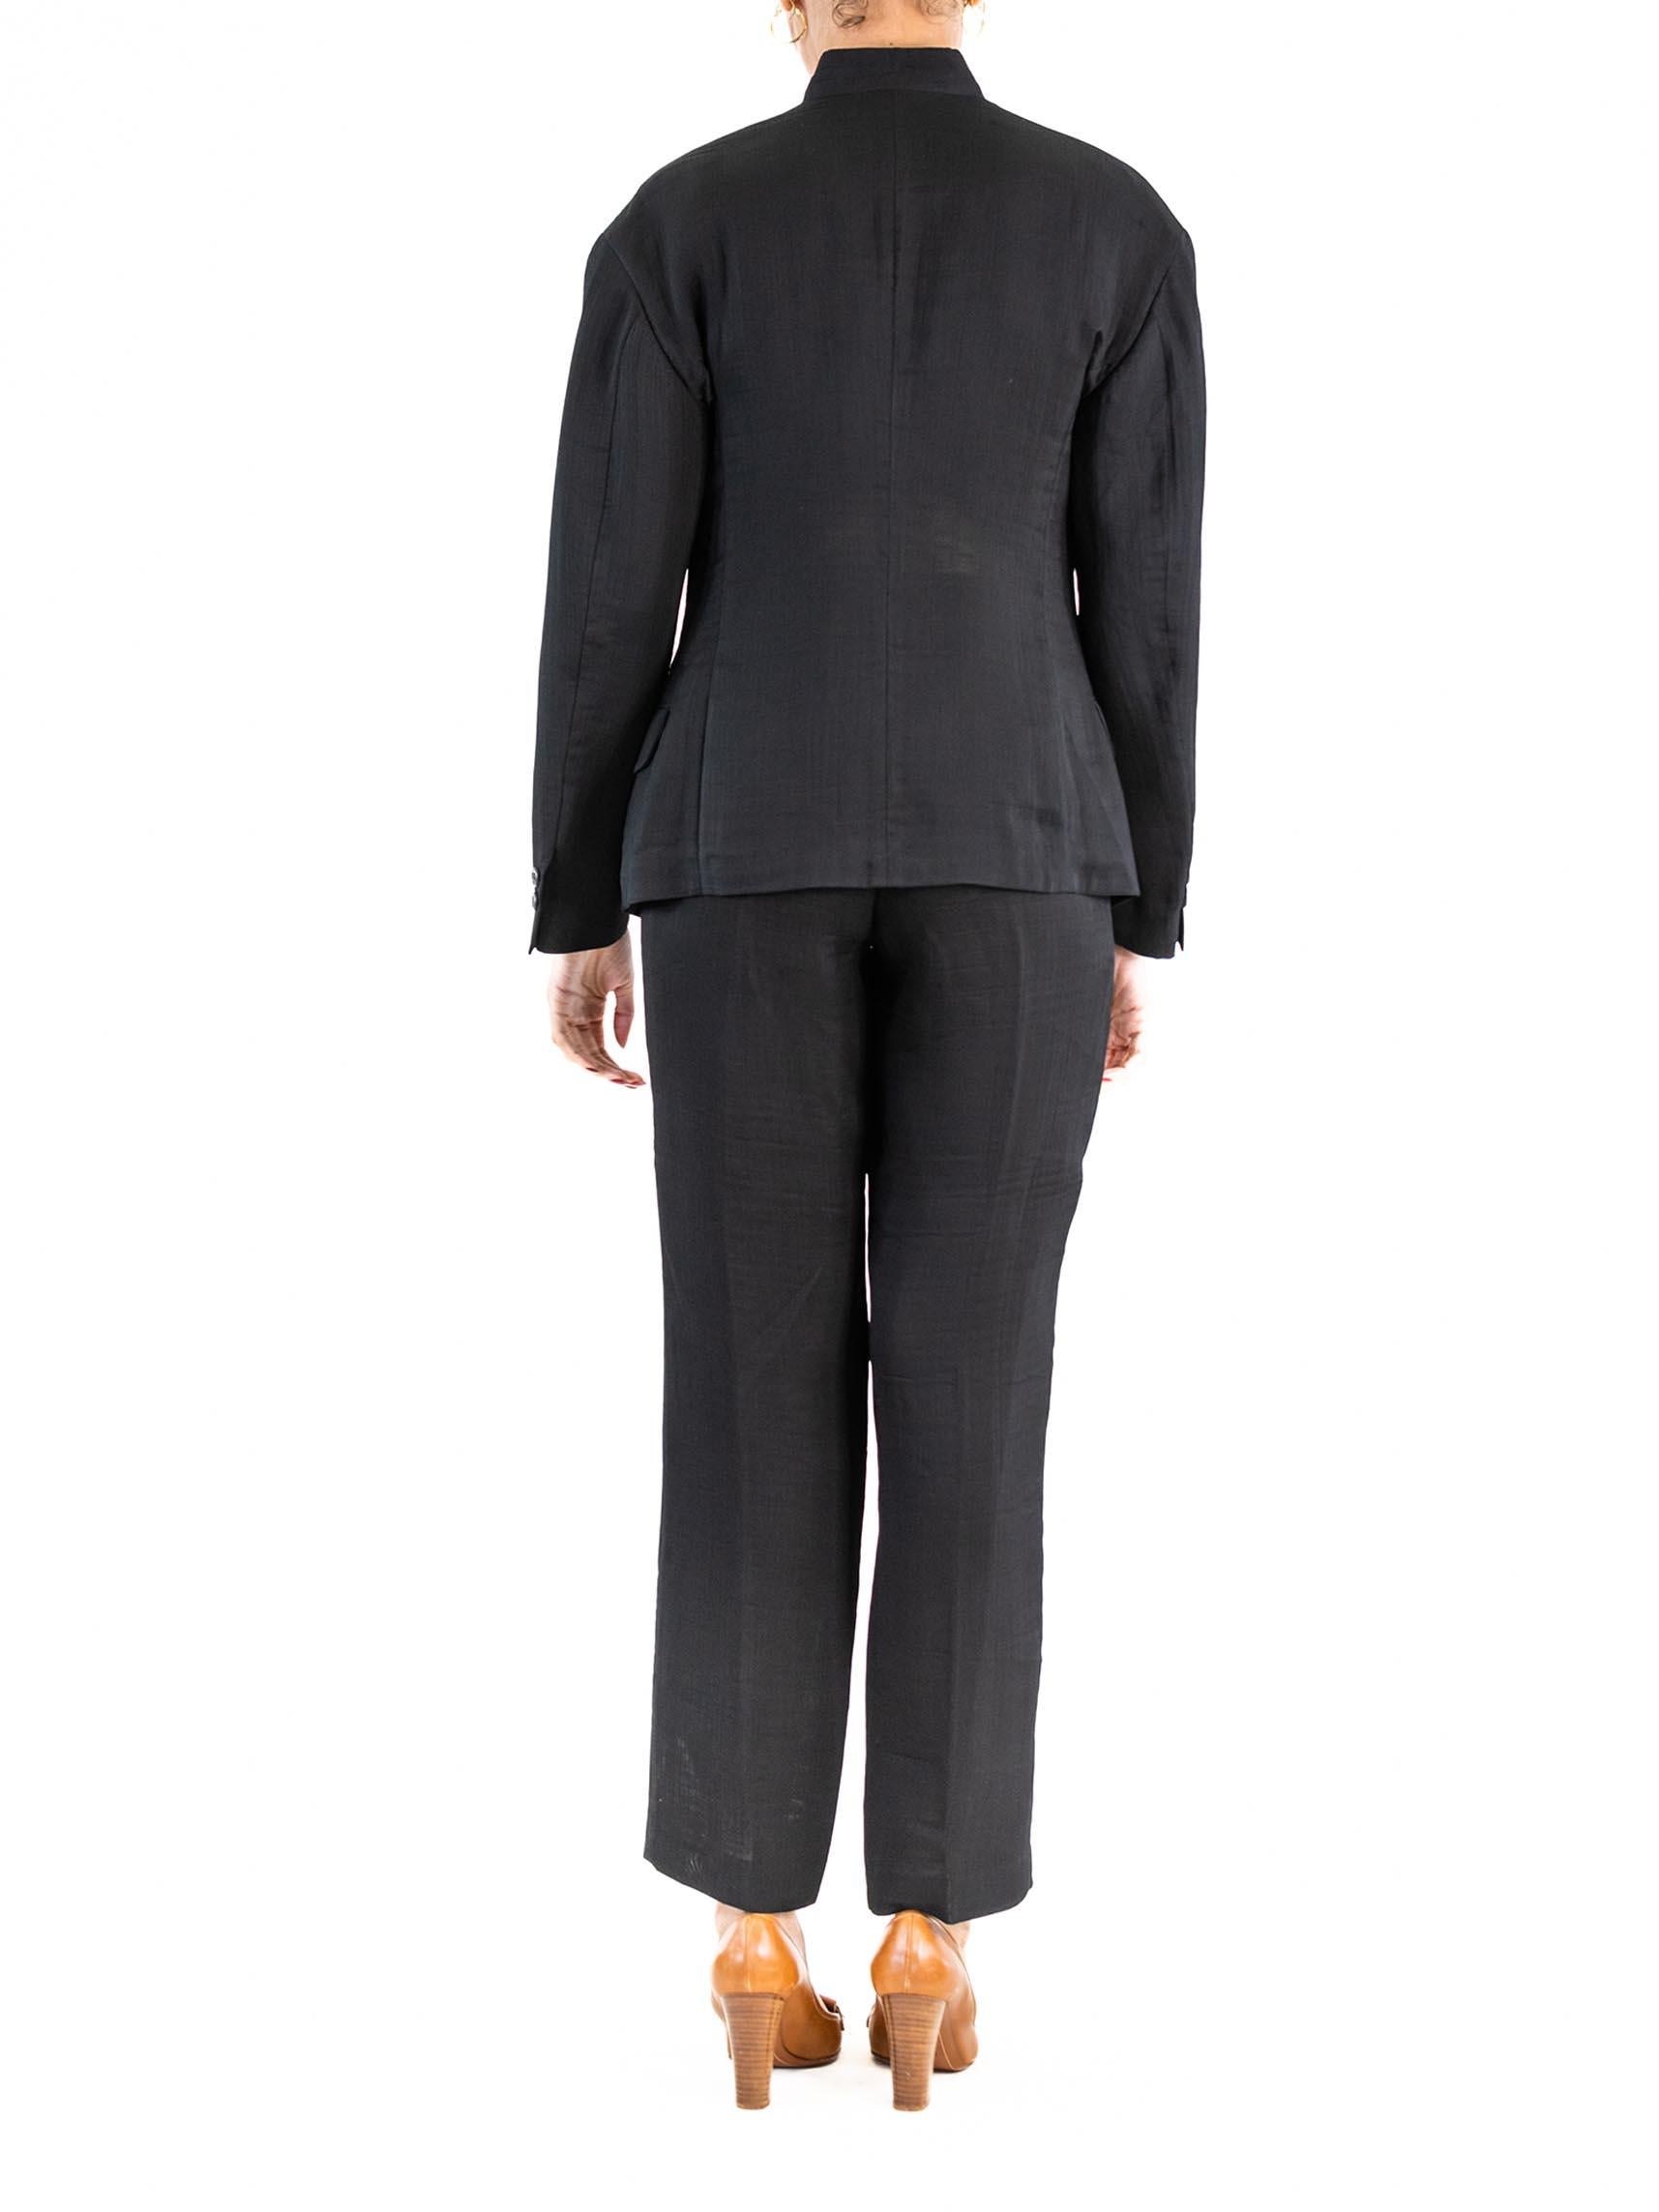 1990S ISSEY MIYAKE Black Rayon Blend Lightweight Pucker Double-Weave Pant Suit For Sale 4